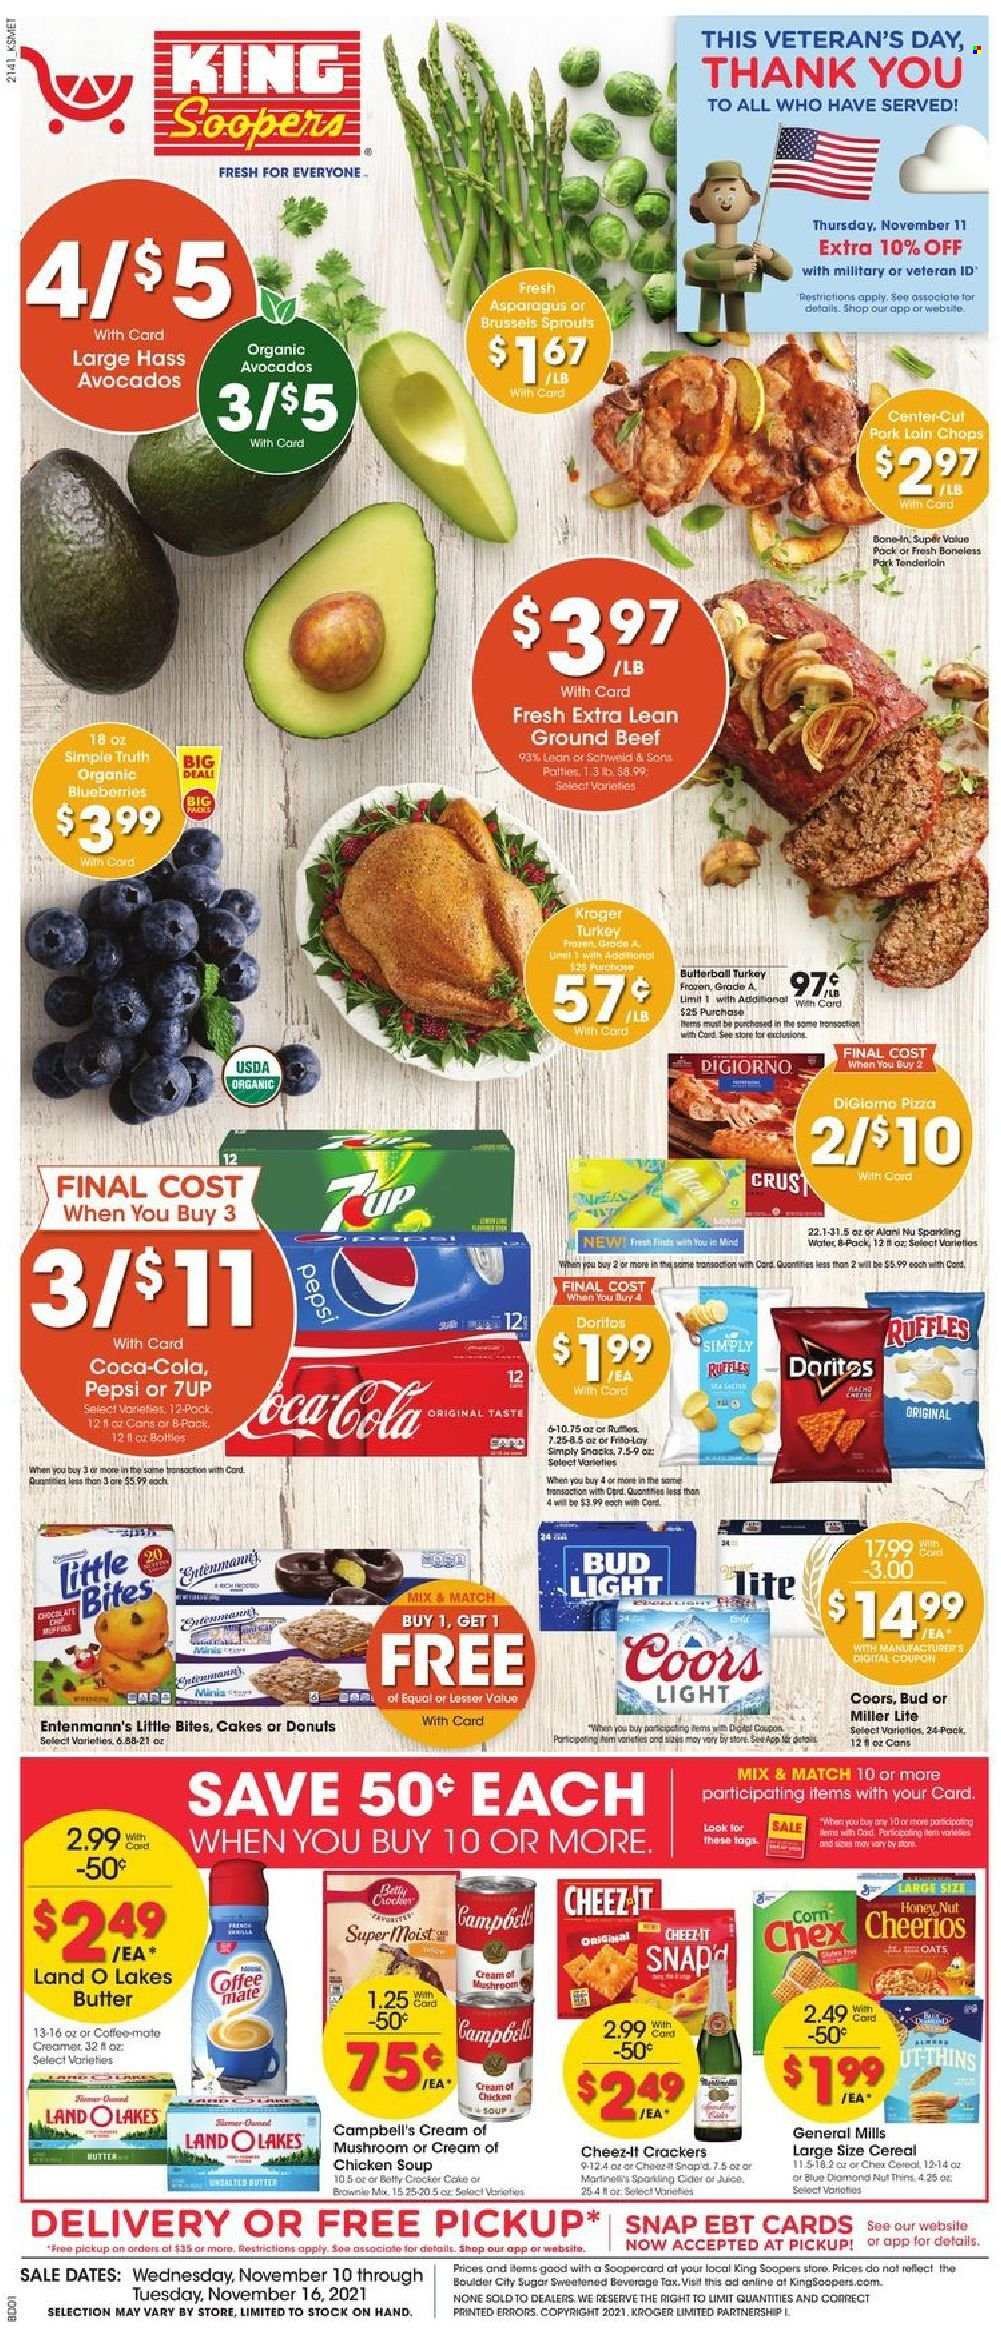 thumbnail - King Soopers Flyer - 11/10/2021 - 11/16/2021 - Sales products - cake, donut, Entenmann's, brownie mix, asparagus, corn, brussel sprouts, avocado, blueberries, Campbell's, pizza, chicken soup, soup, Butterball, creamer, snack, crackers, Little Bites, Doritos, Thins, Cheez-It, Ruffles, sugar, oats, cereals, Cheerios, honey, Coca-Cola, Pepsi, juice, 7UP, sparkling water, coffee, sparkling cider, sparkling wine, cider, beer, Bud Light, beef meat, ground beef, pork chops, pork loin, pork meat, pork tenderloin, Miller Lite, Coors. Page 1.